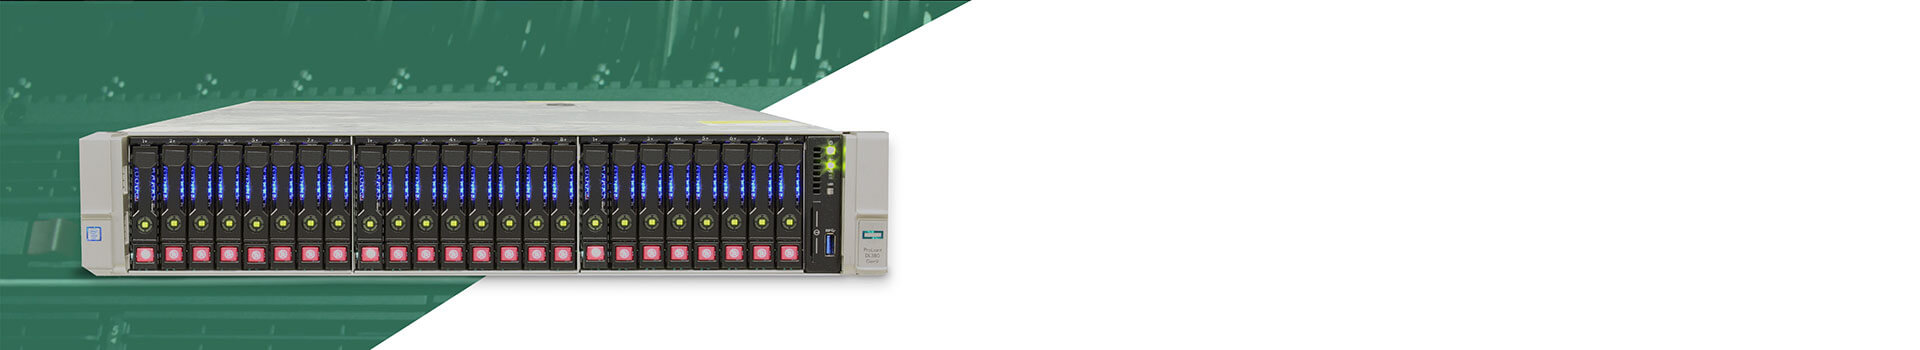 see our refurb HPE Proliant DL380 Servers